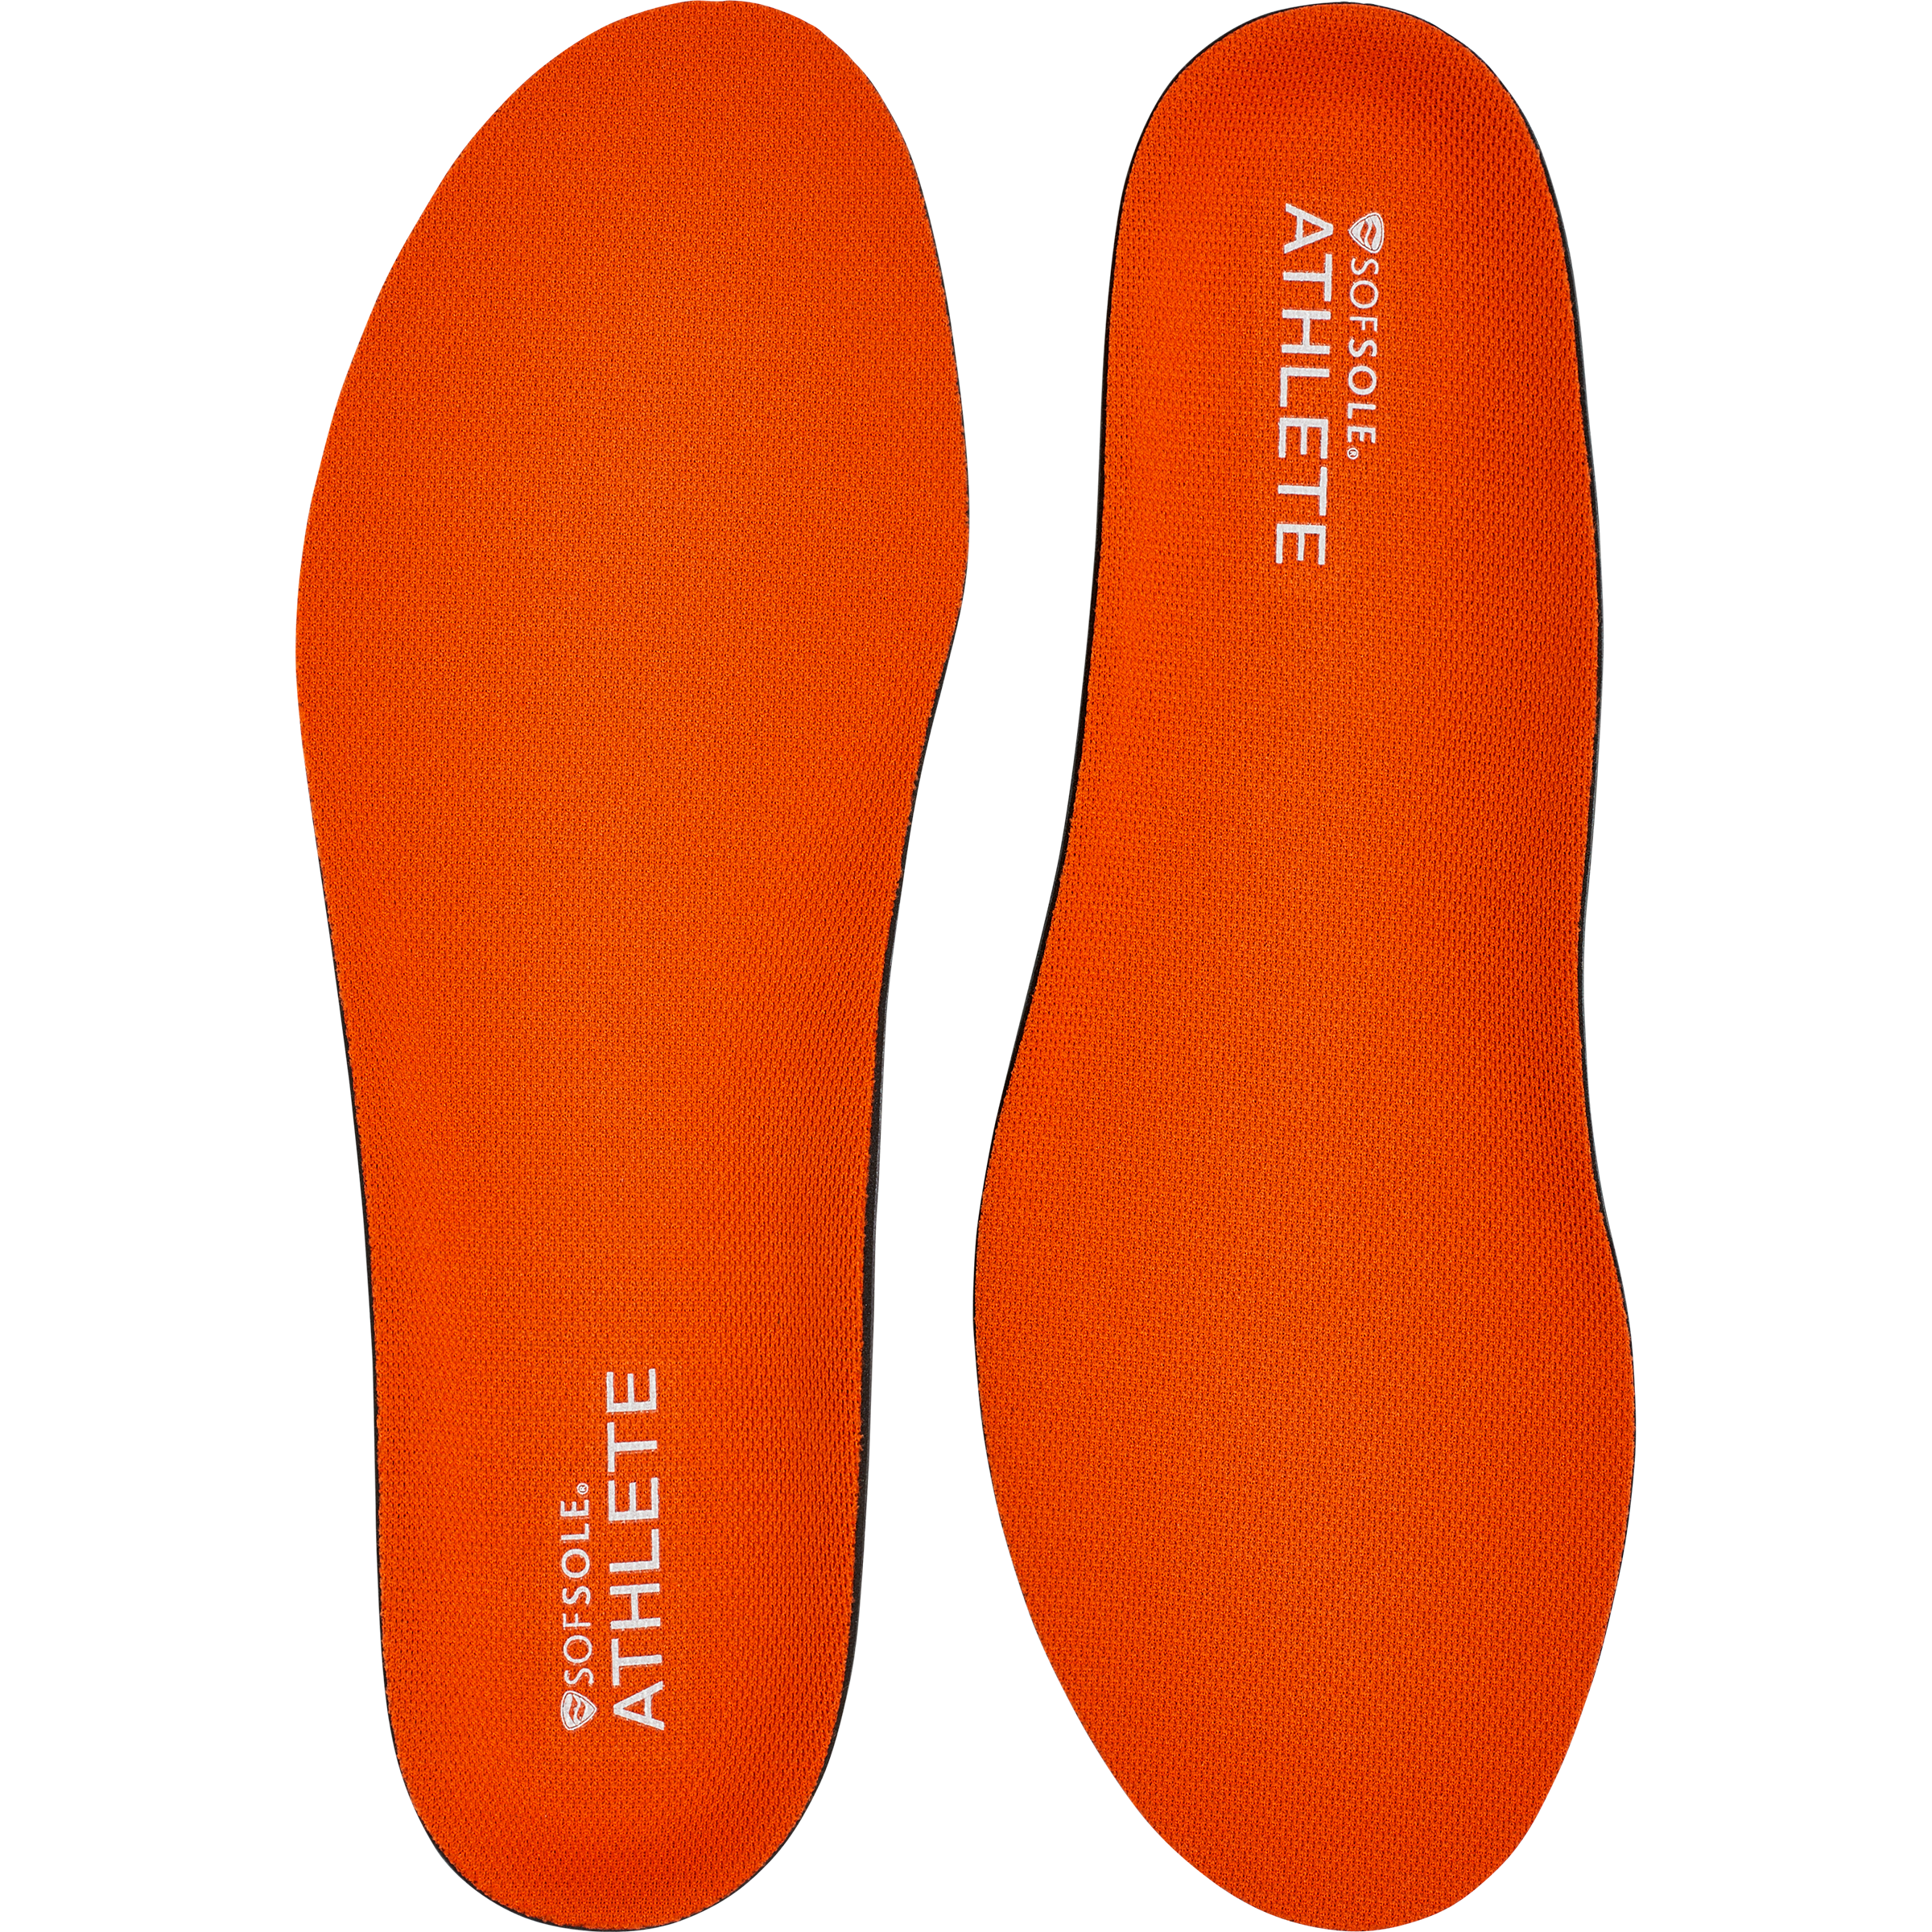 sof sole athlete women's performance insole